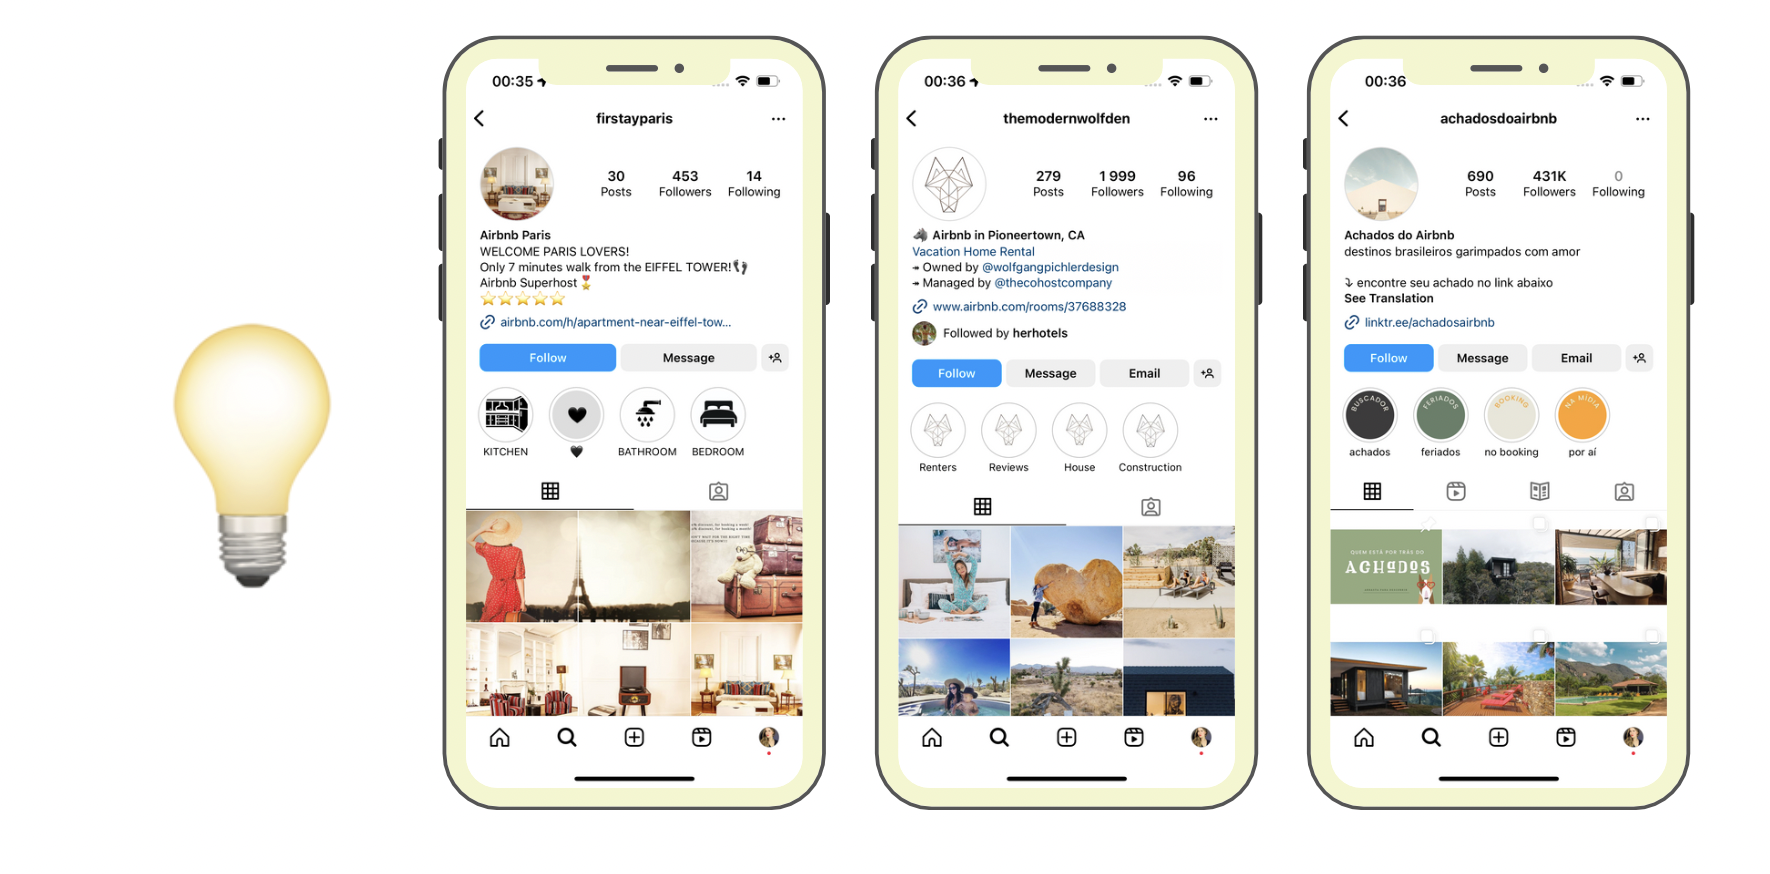 examples of accounts which promote Airbnb marketing on instagram